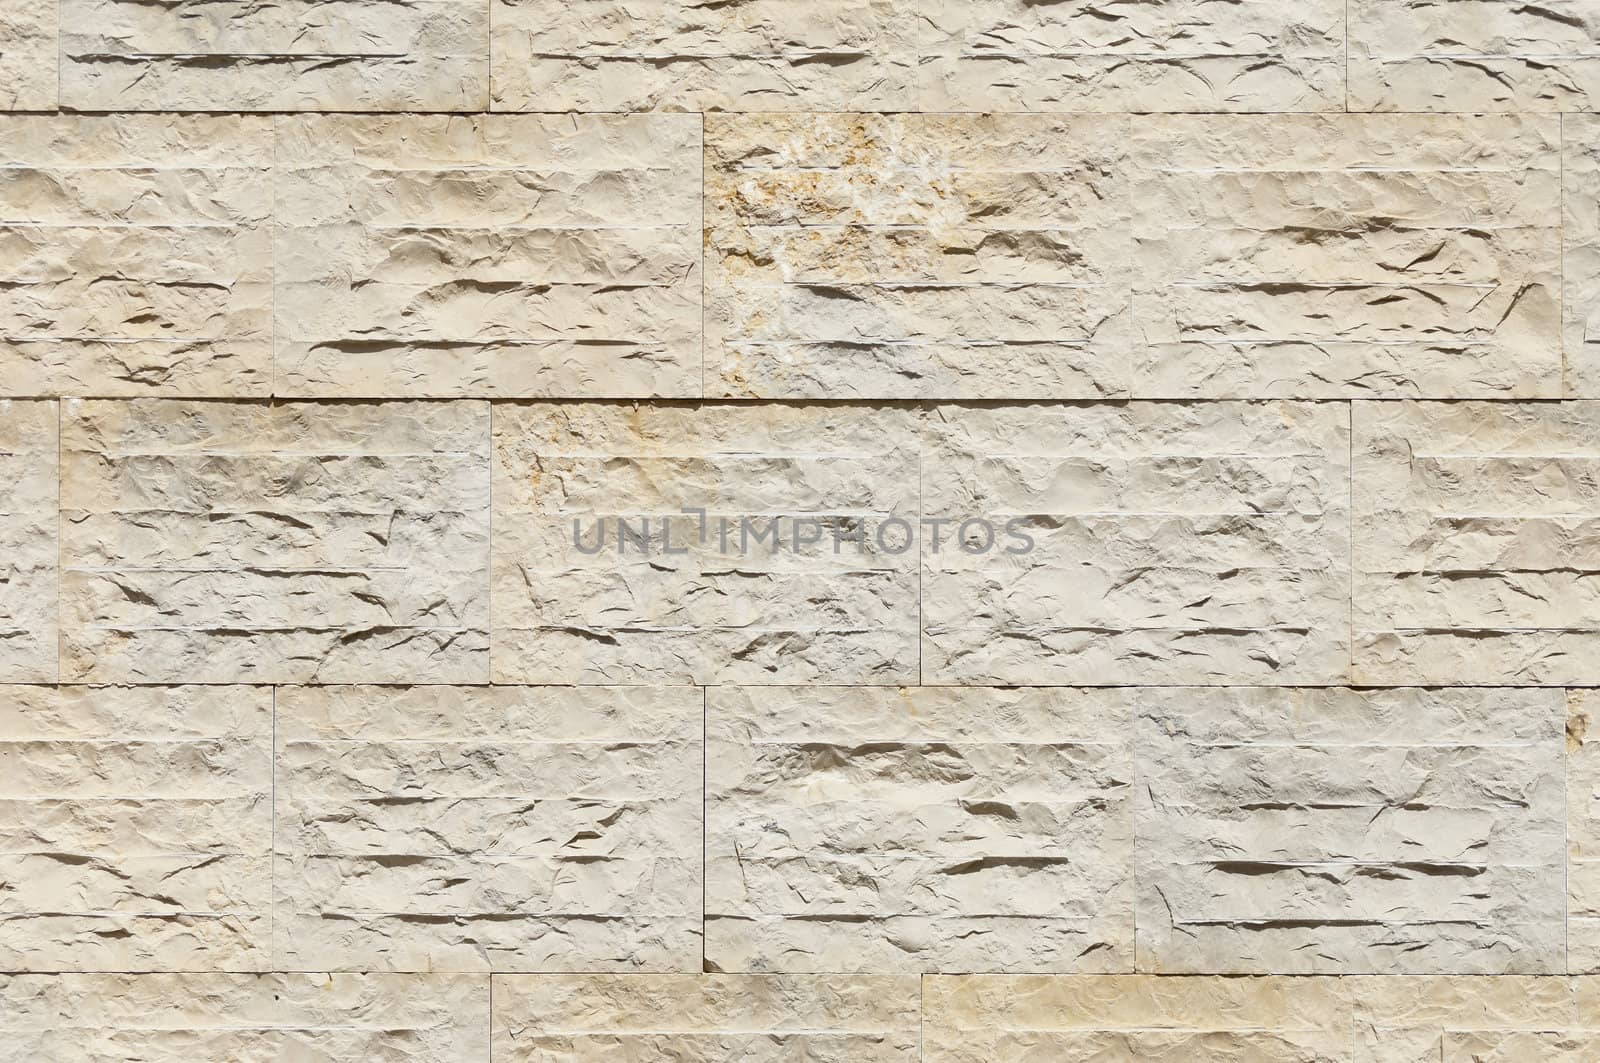 Detail of a wall made of rectangular blocks of limestone